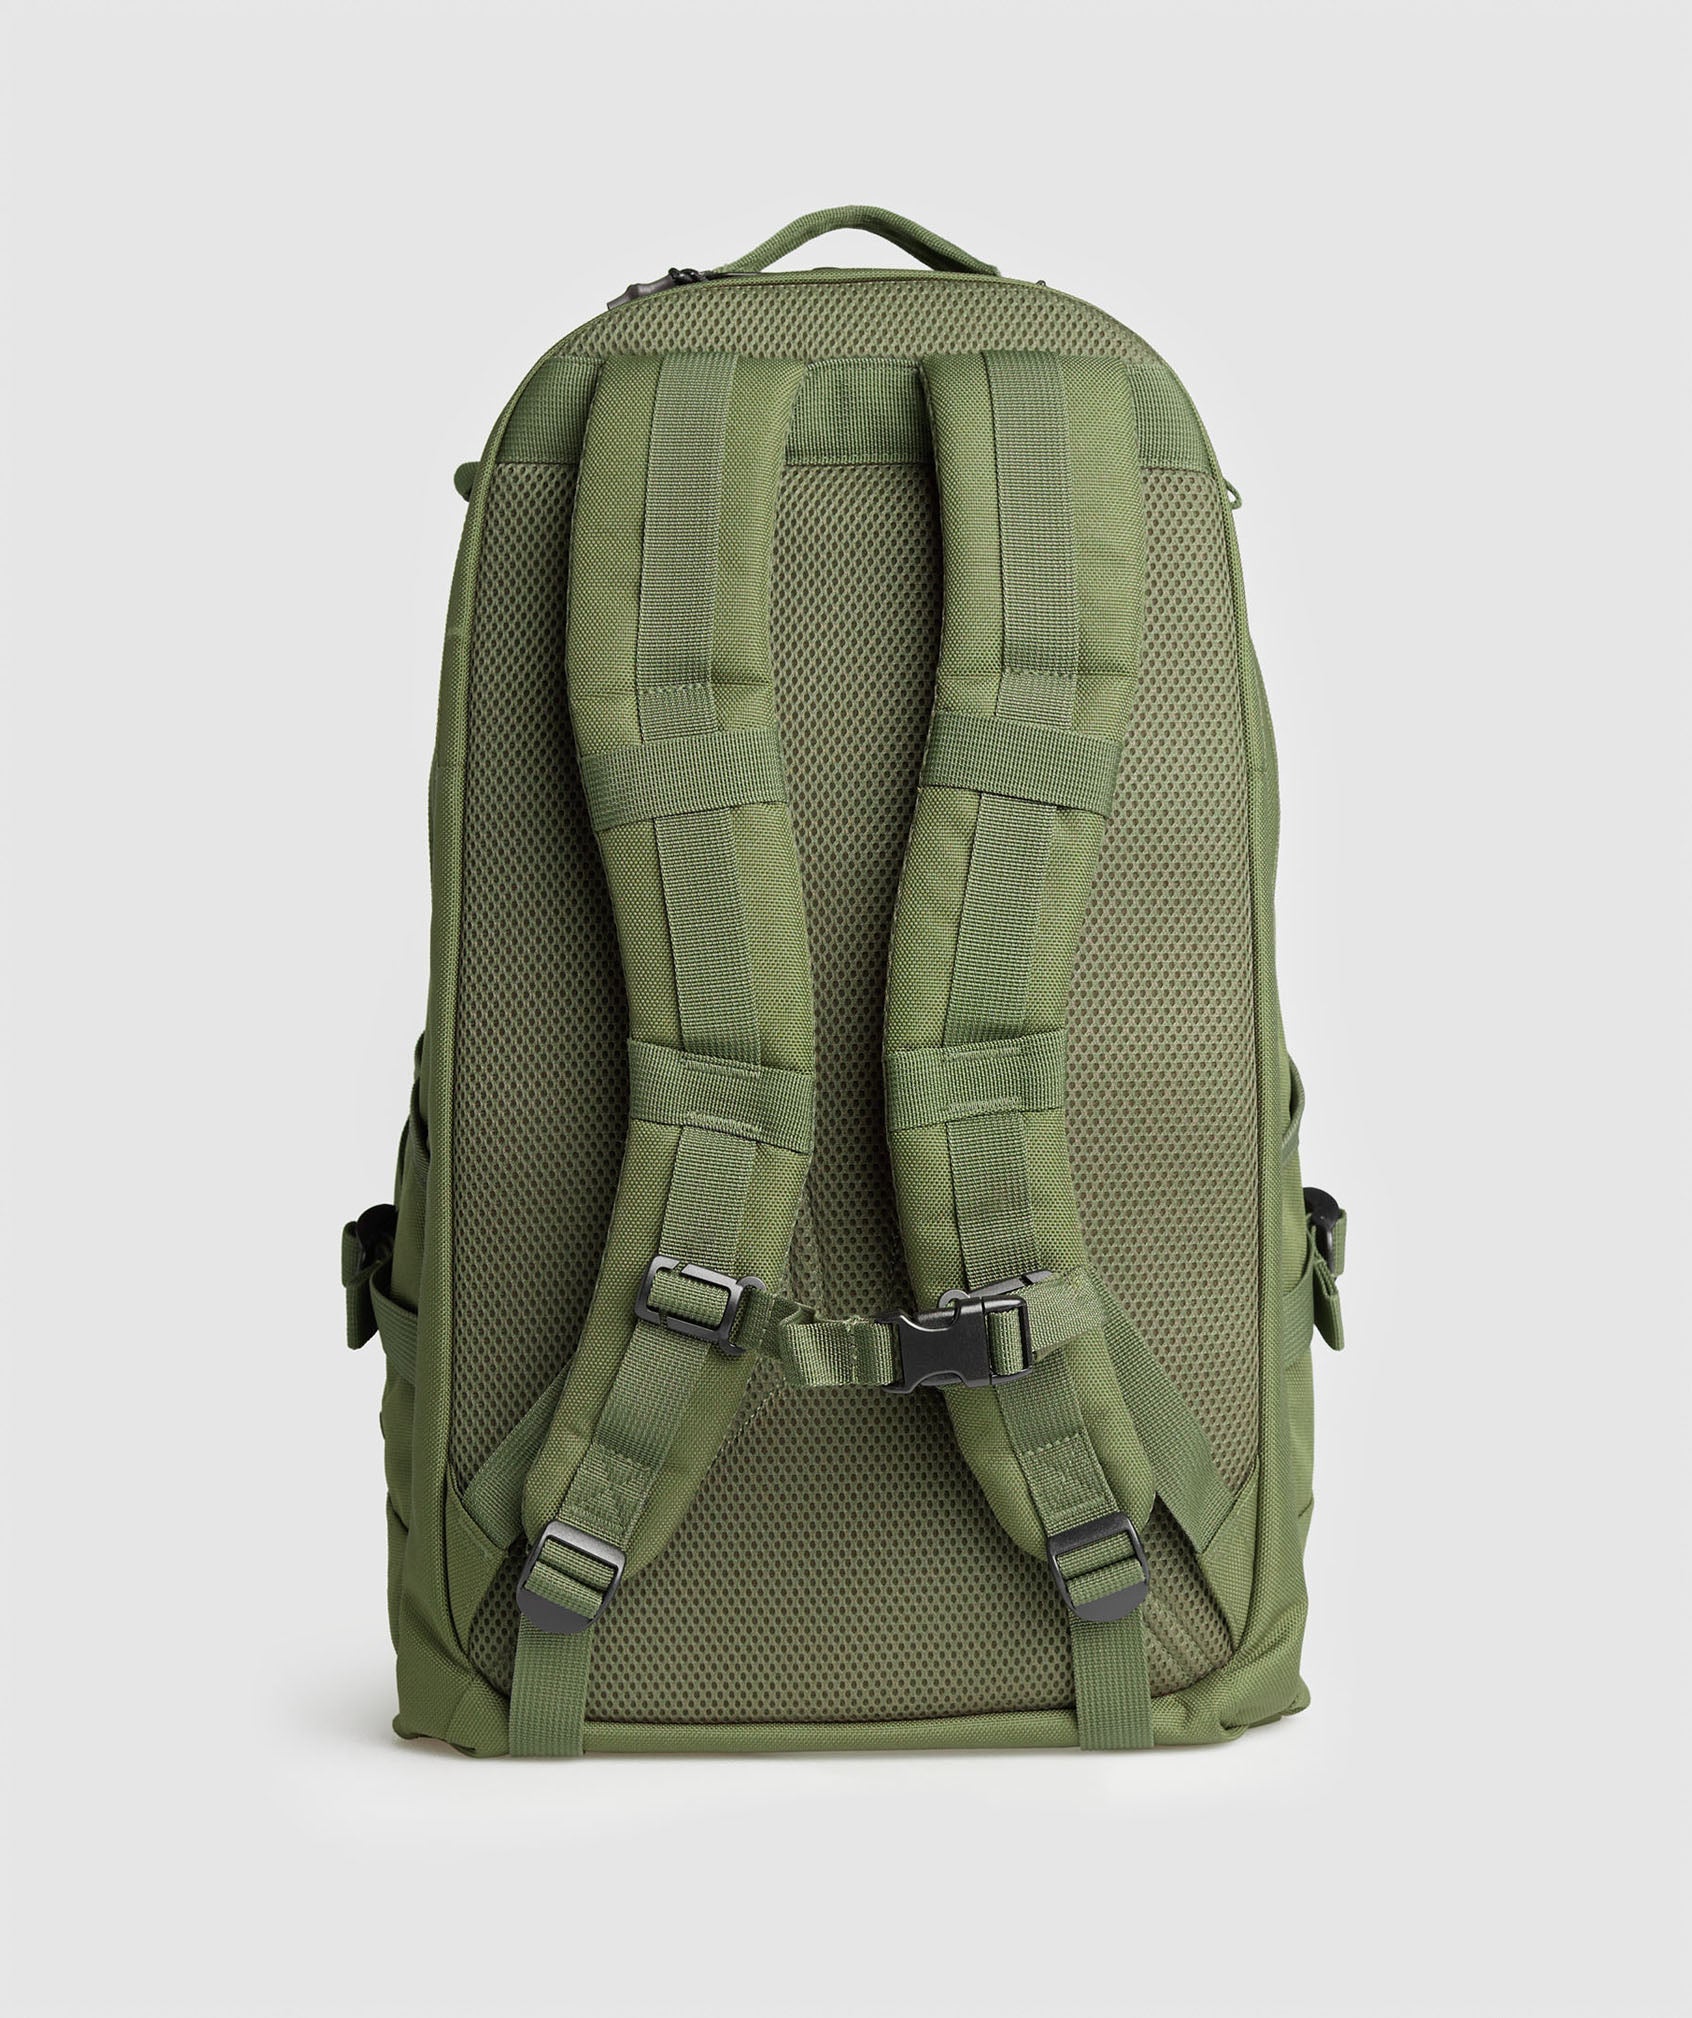 Pursuit Backpack in Green - view 2